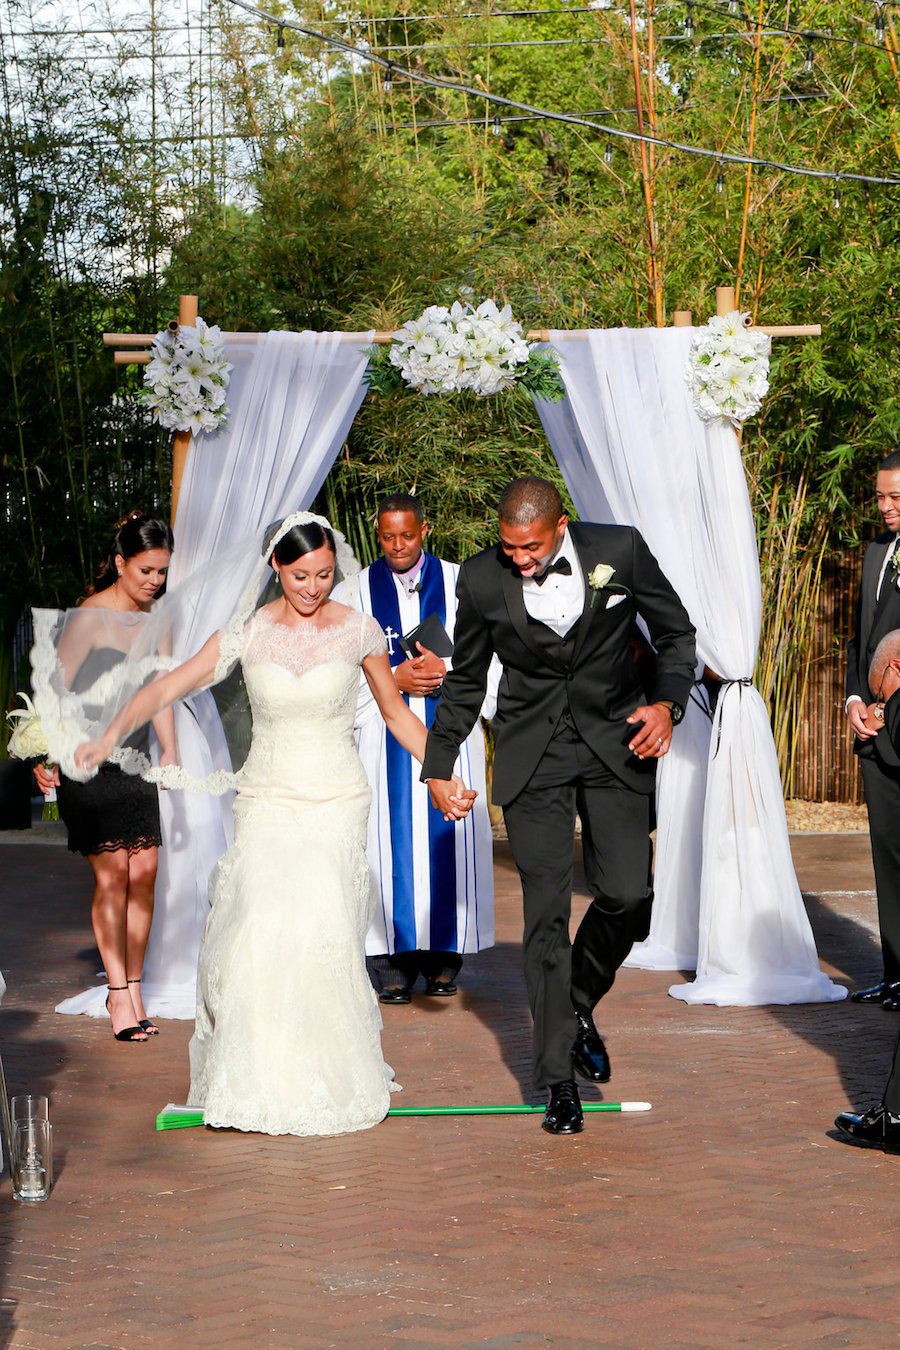 Bride and Groom Jumping Over Broom at St. Petersburg Wedding Ceremony